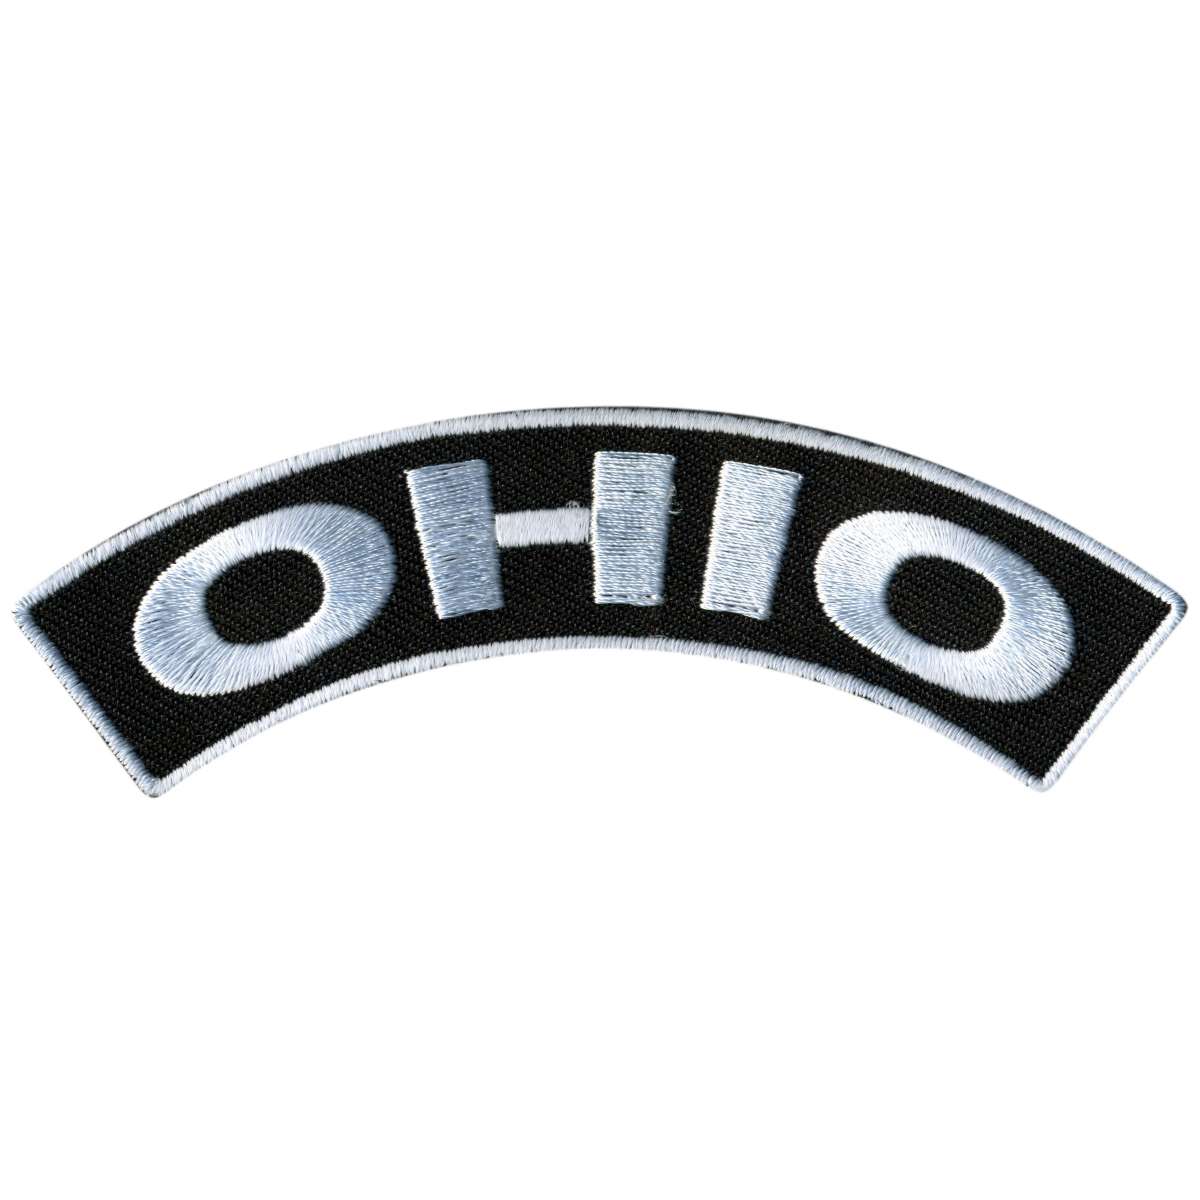 Hot Leathers Ohio 4” X 1” Top Rocker Patch PPM4070